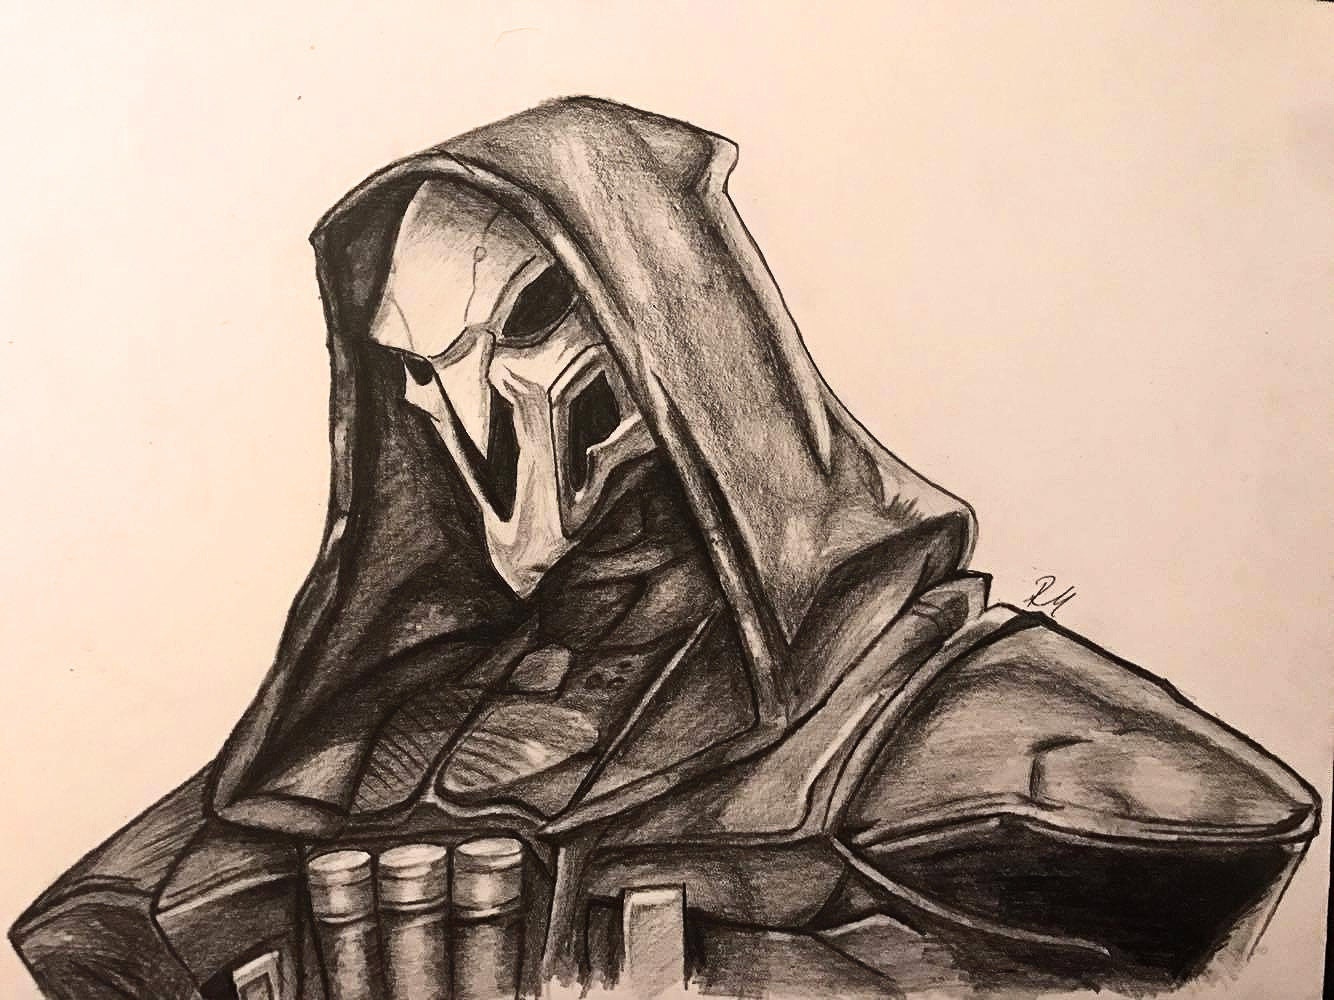 Reaper From the game Overwatch. Print of pencil drawing.